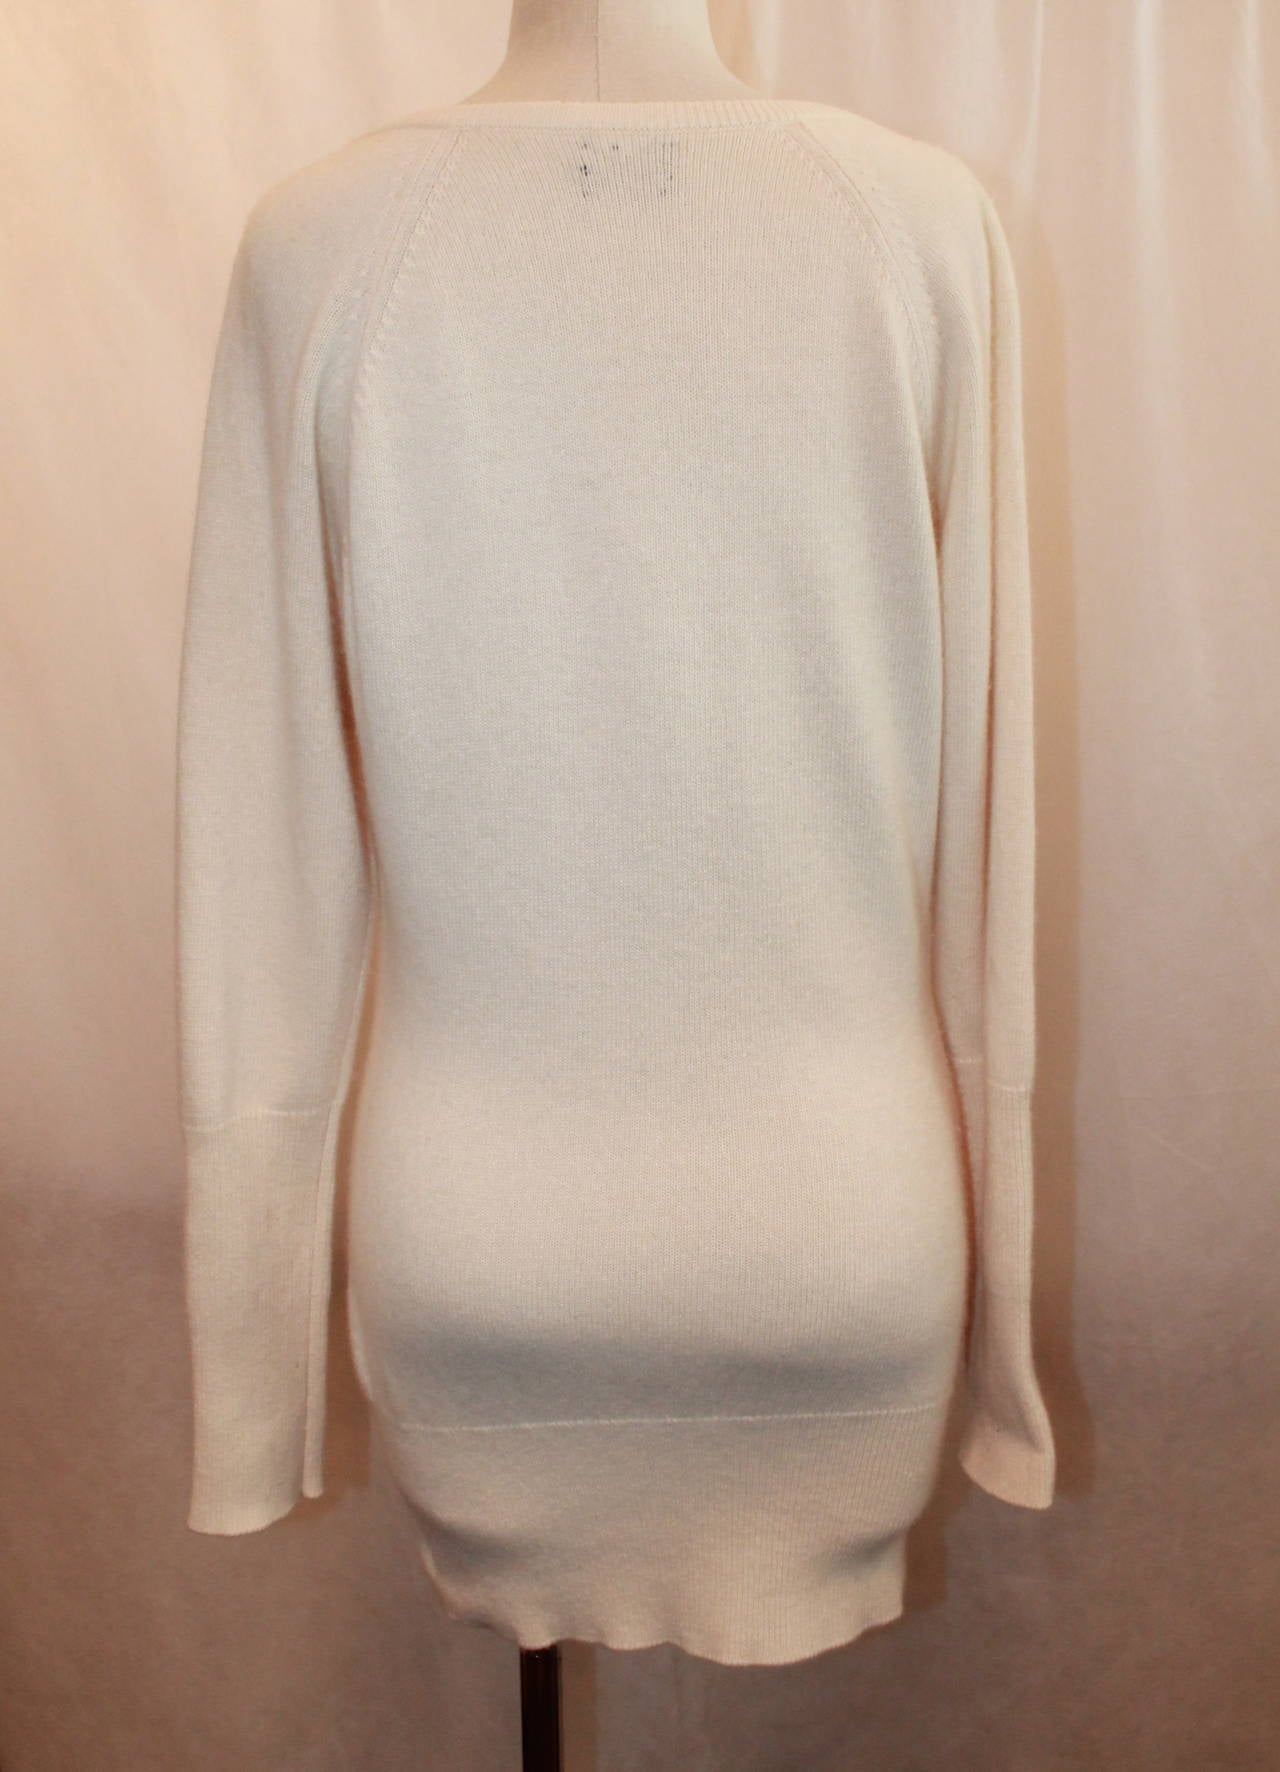 Women's Chanel 1980's Vintage Creme Cashmere Sweater with Pearl Buttons - L